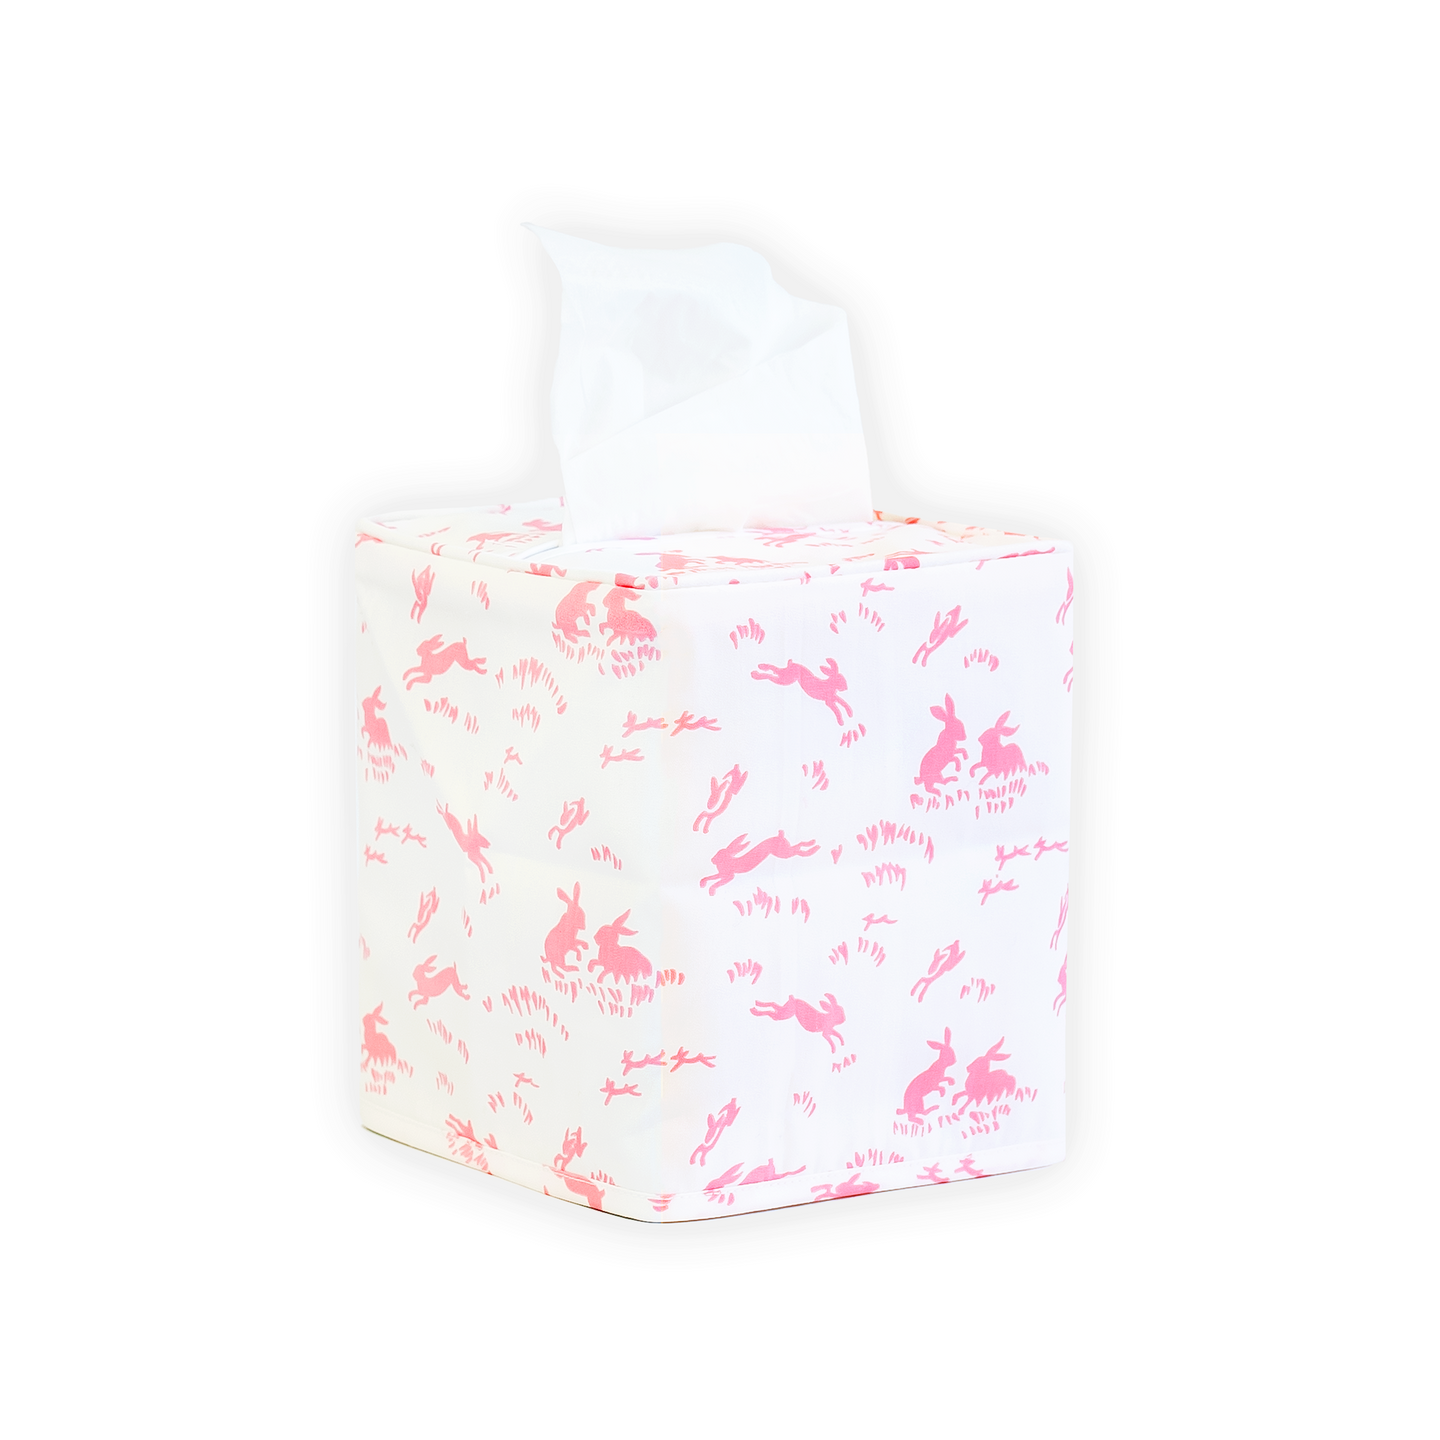 Lapins Pink Tissue Box Cover